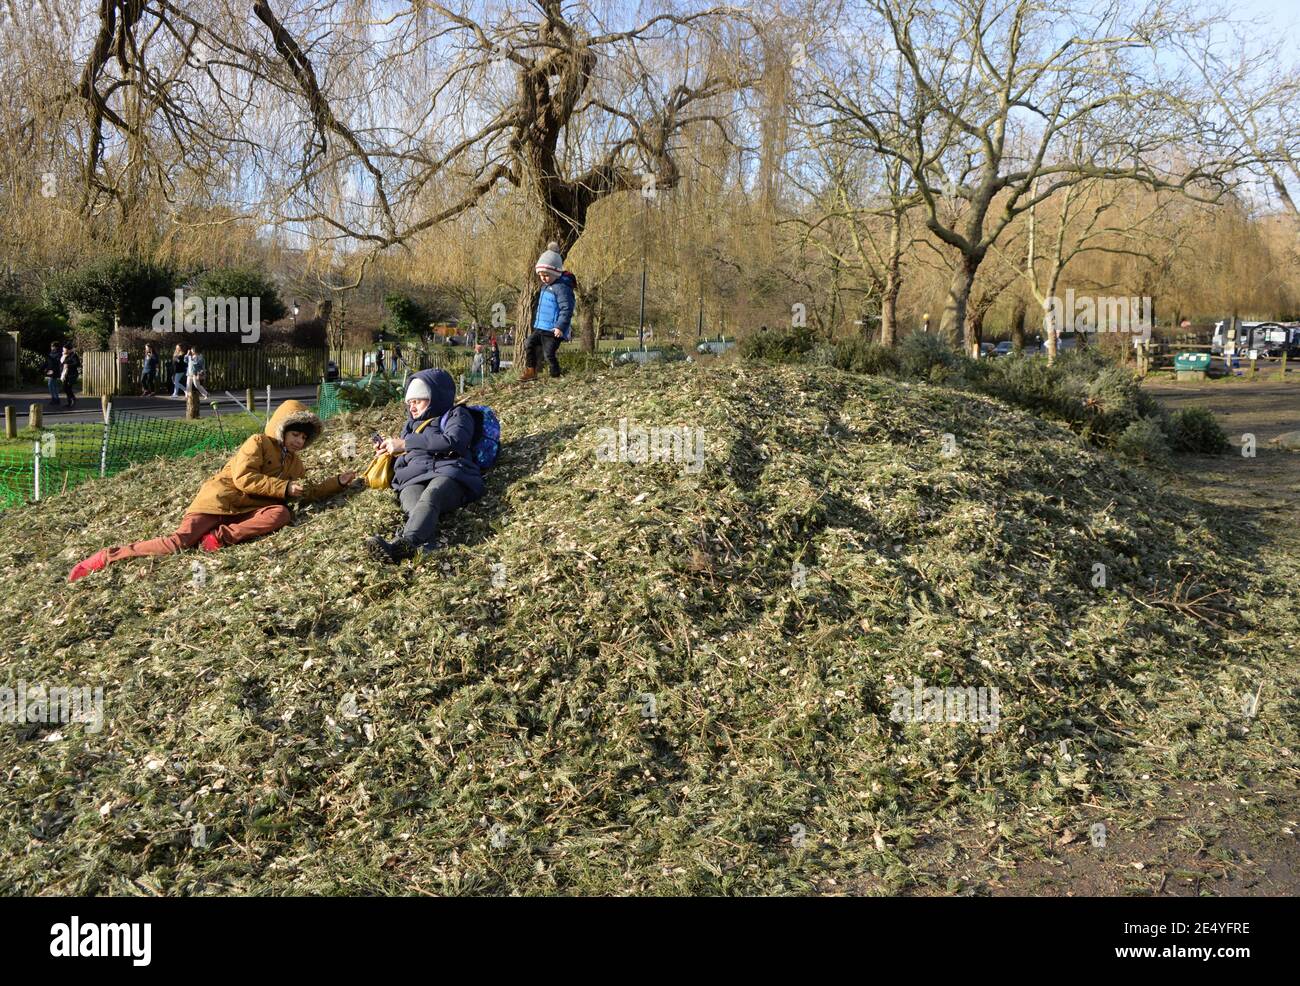 A mother and two children lie on a large pile of chopped up Christmas trees. Over fifty used Christmas trees lie abandoned on Hampstead Heath in January. Park wardens make an effort to chop them up into mulch for recycling. Stock Photo